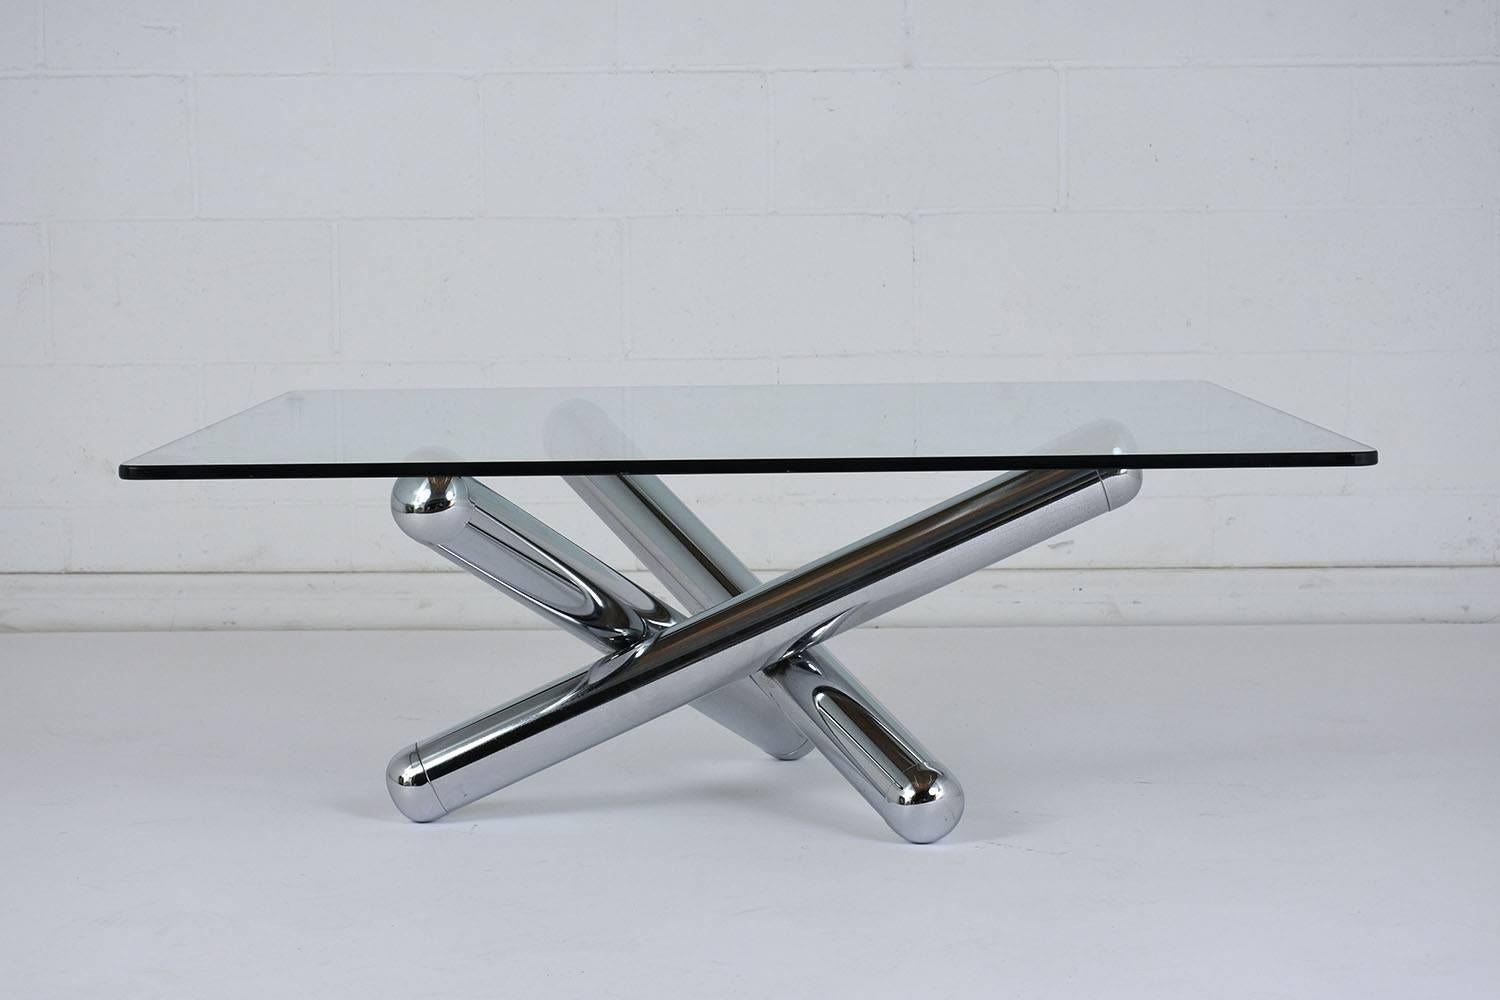 This 1970s Mid-Century Modern-style coffee table features an atomic shaped chrome base. The chrome base has three rounded arms that overlap and create a unique sculptural base. The table features a 1/2